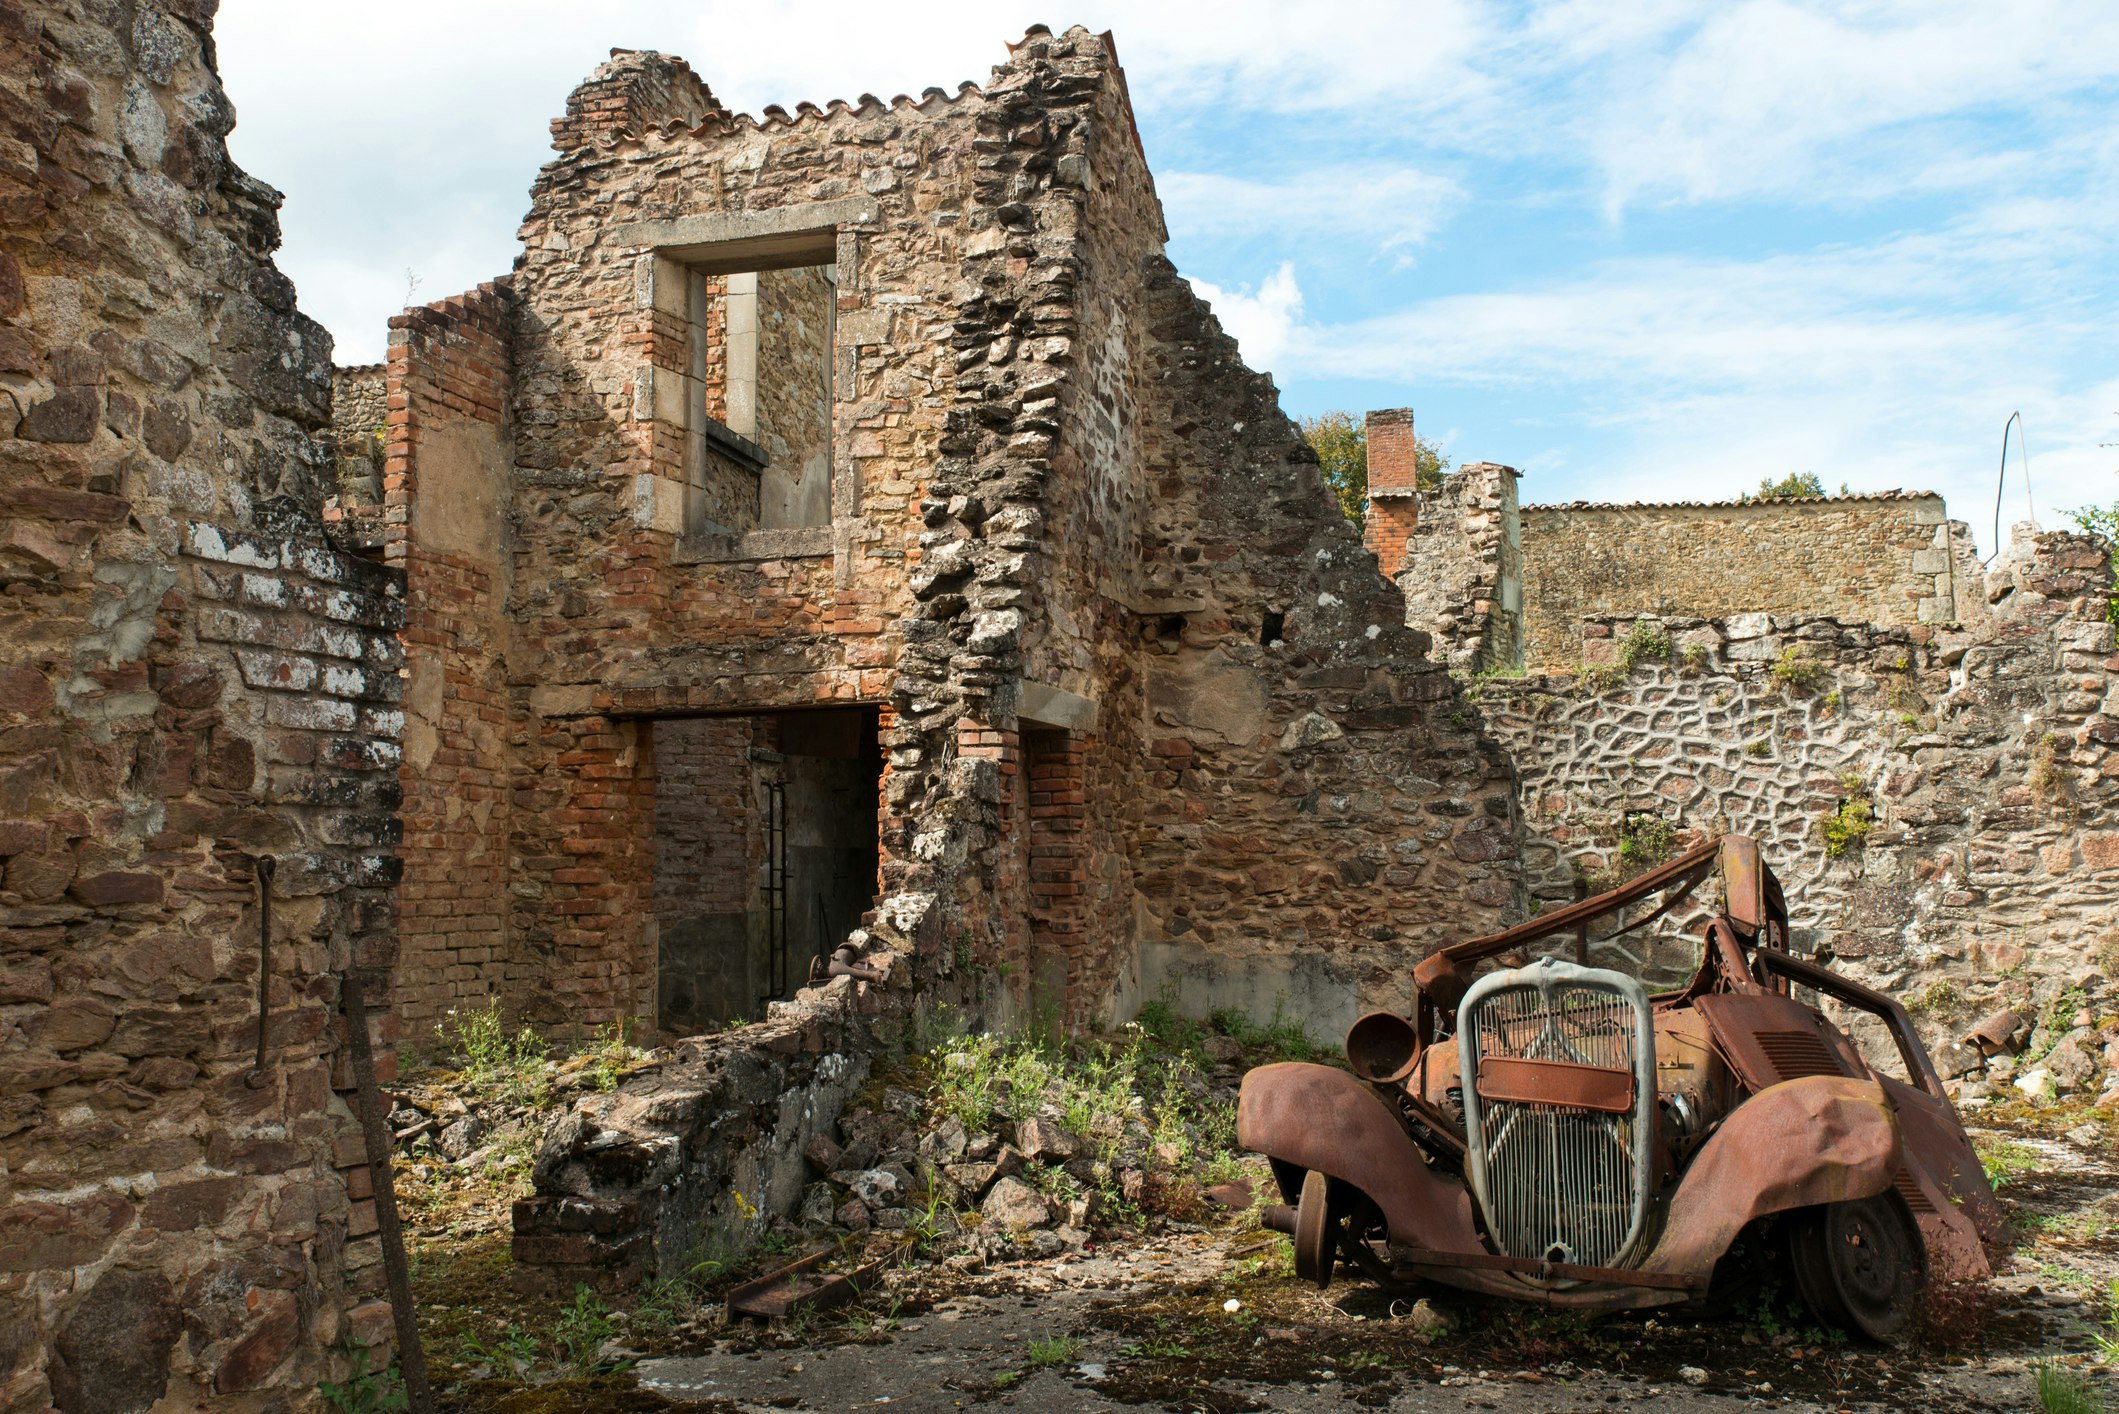 A rusted car lies in the ruins of a house in Oradour-Sur Glane in France, as the sun shines down.